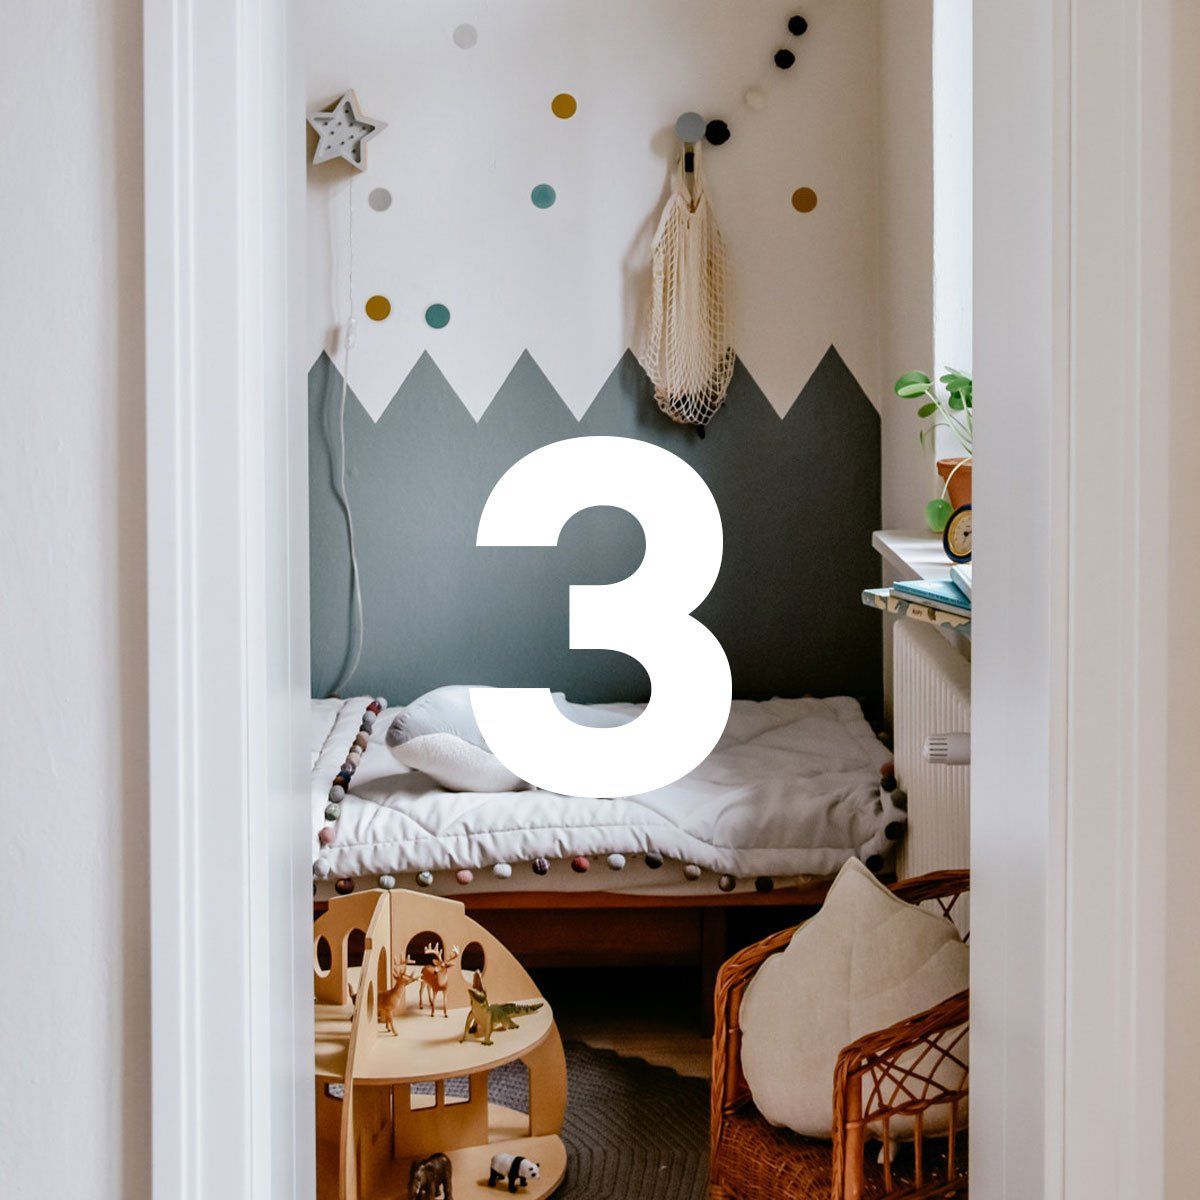 3 lovely little (and not expensive) things that will change your baby's room completely!